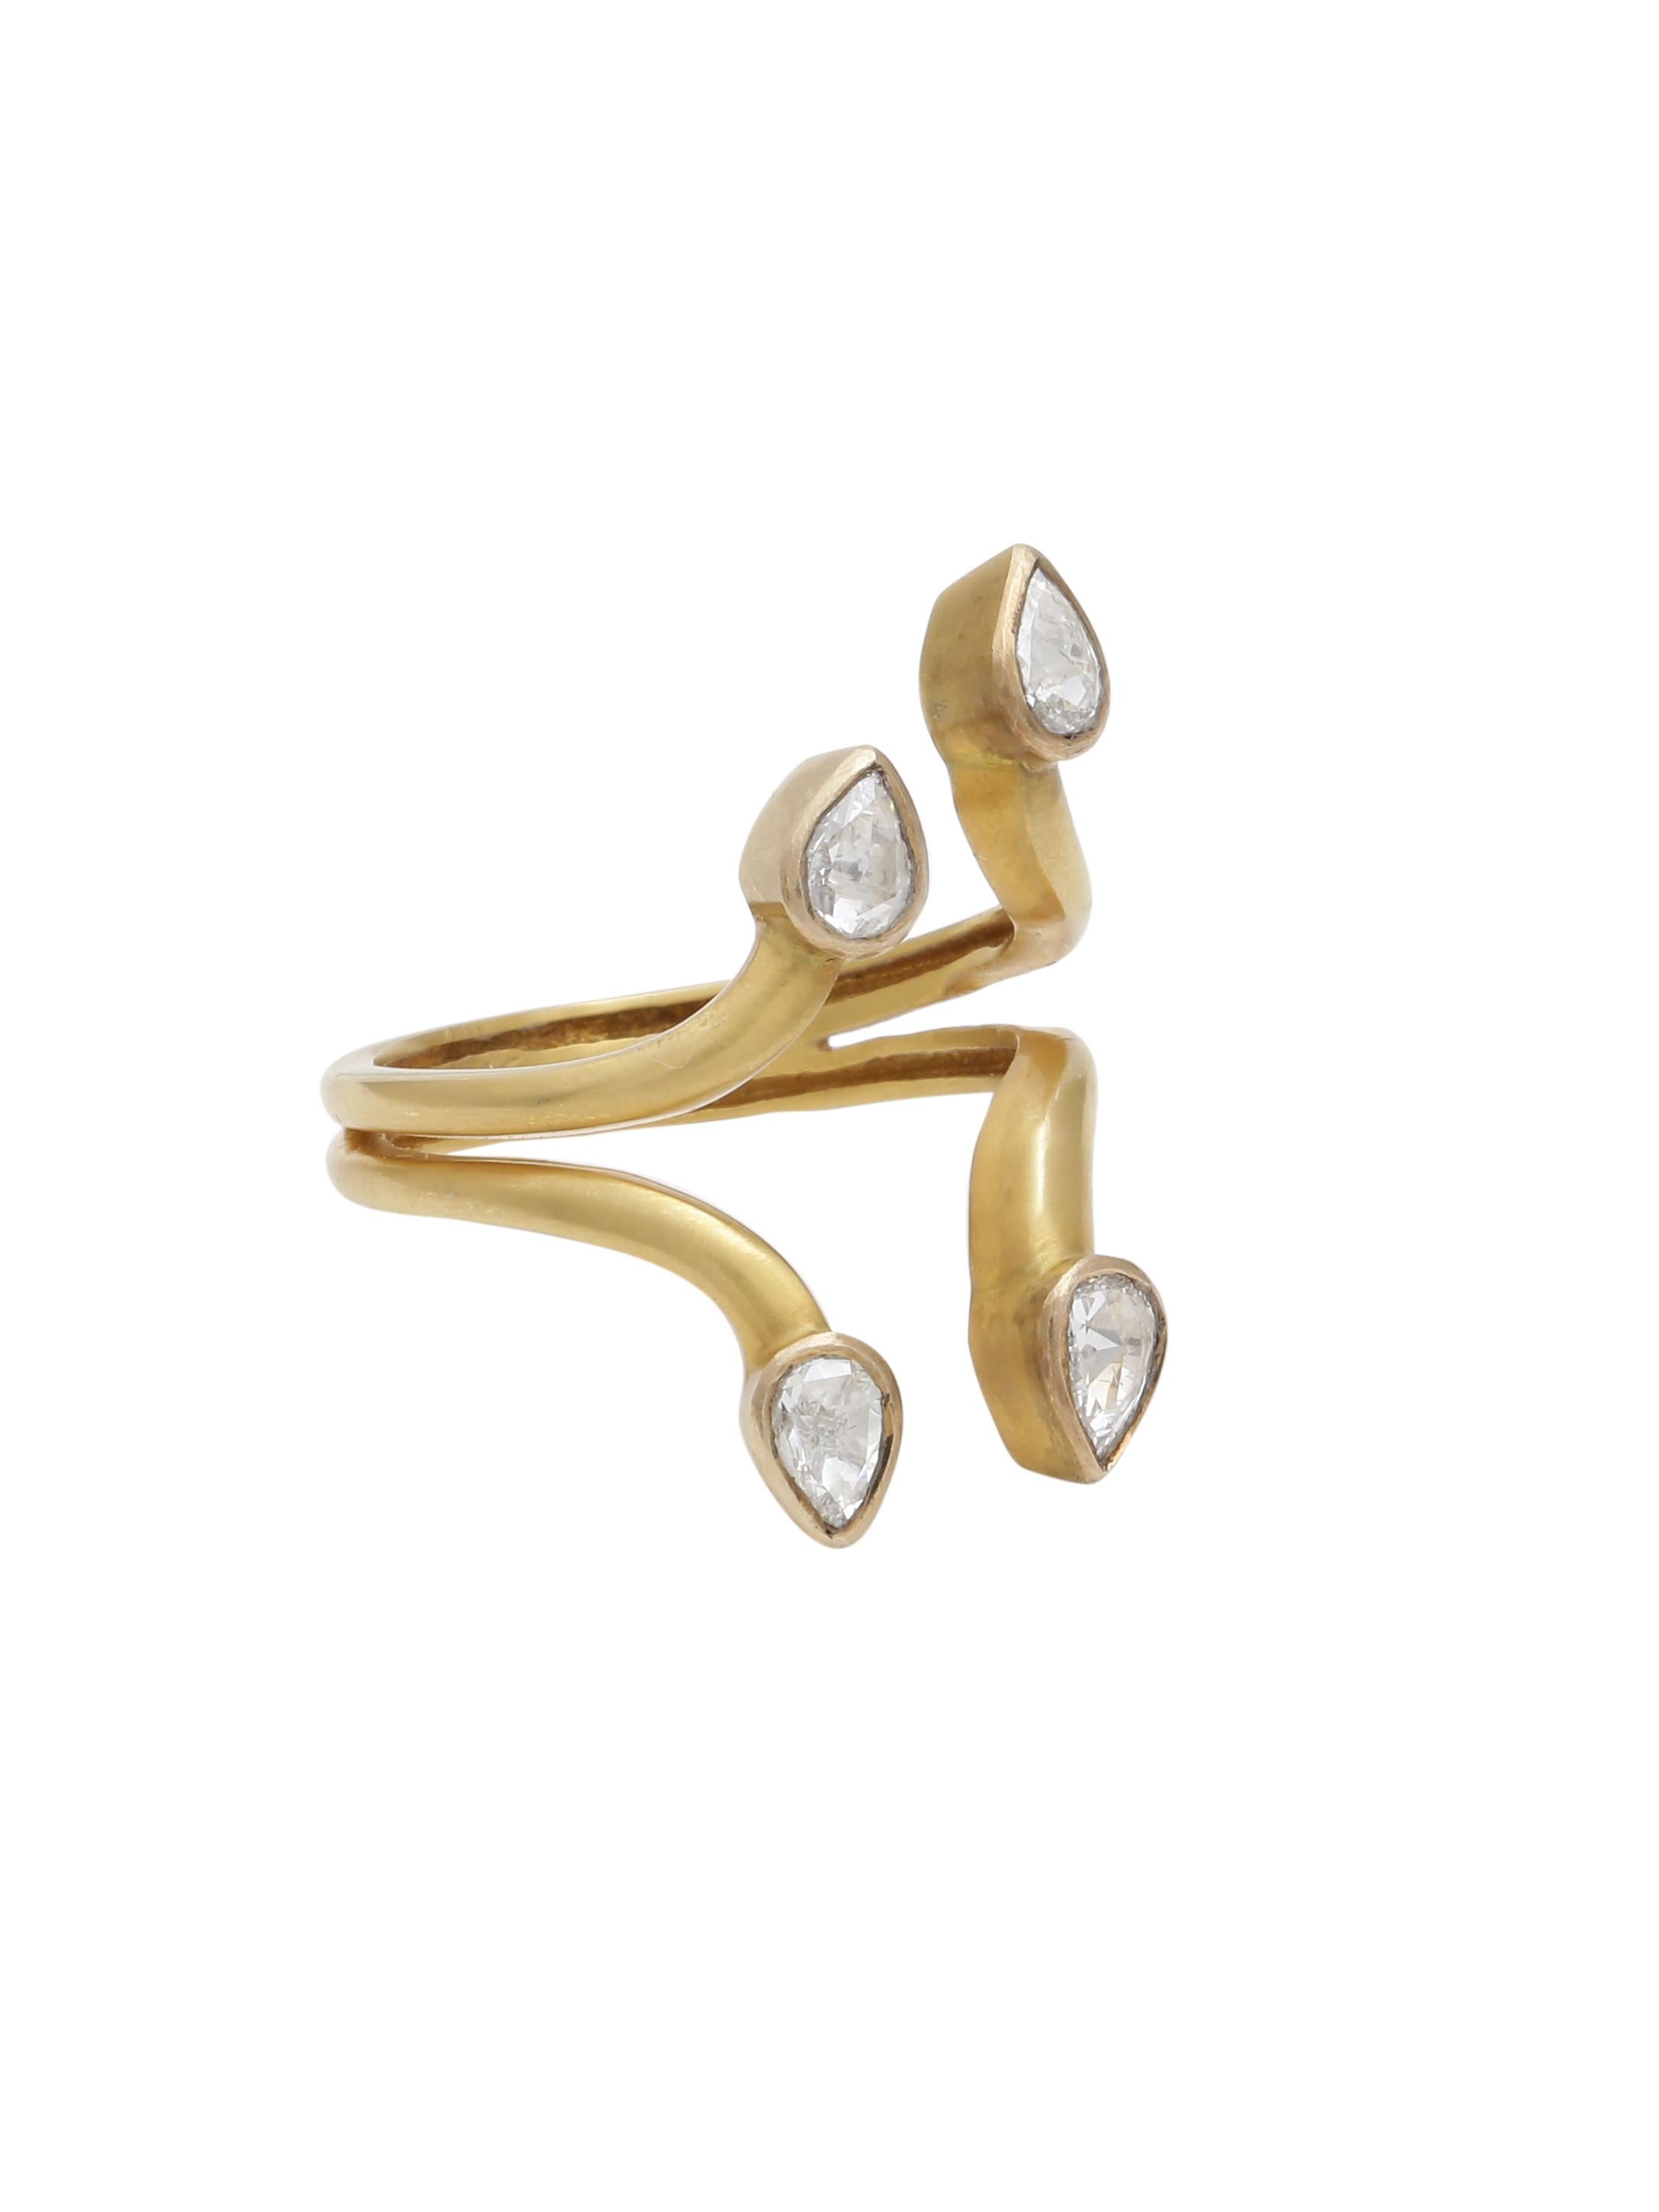 A fancy Diamond Ring with 18K Matte Finish Yellow Gold. 
Diamonds in the Ring weigh 0.53 carats. Its a light weight ring that hugs the finger perfectly. 
The ring has a fancy design but yet an elegant appeal.

Ring Size: US7